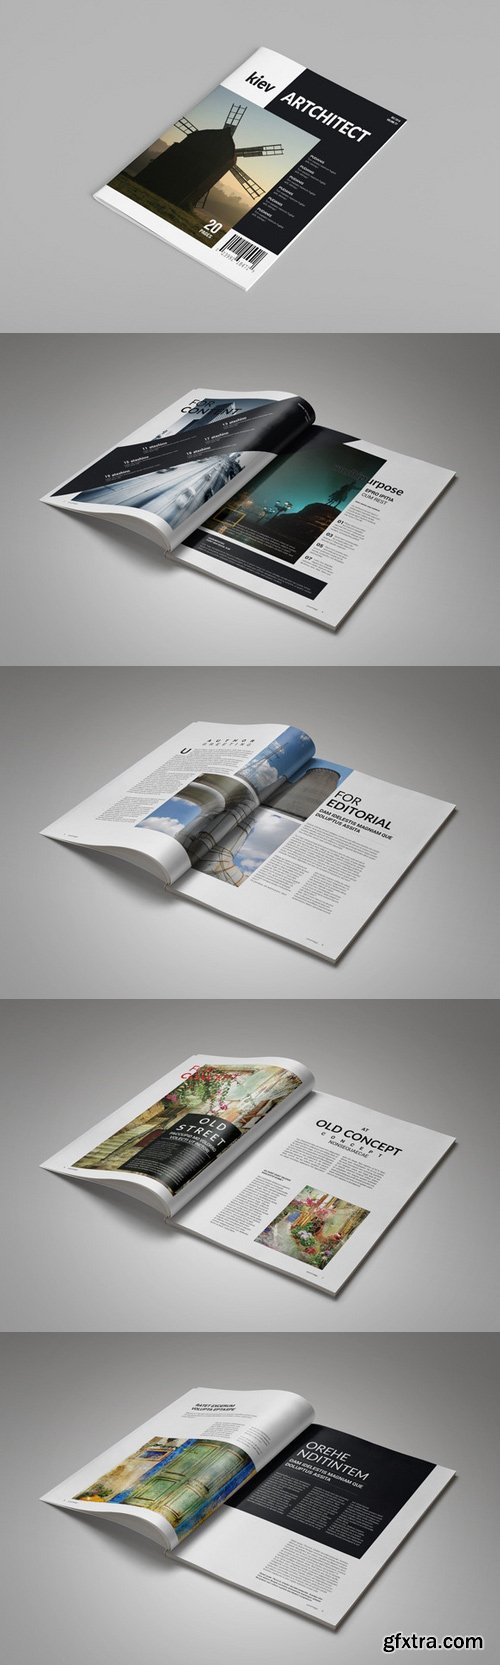 CM - InDesign Magazine Template 20 Pages 128769